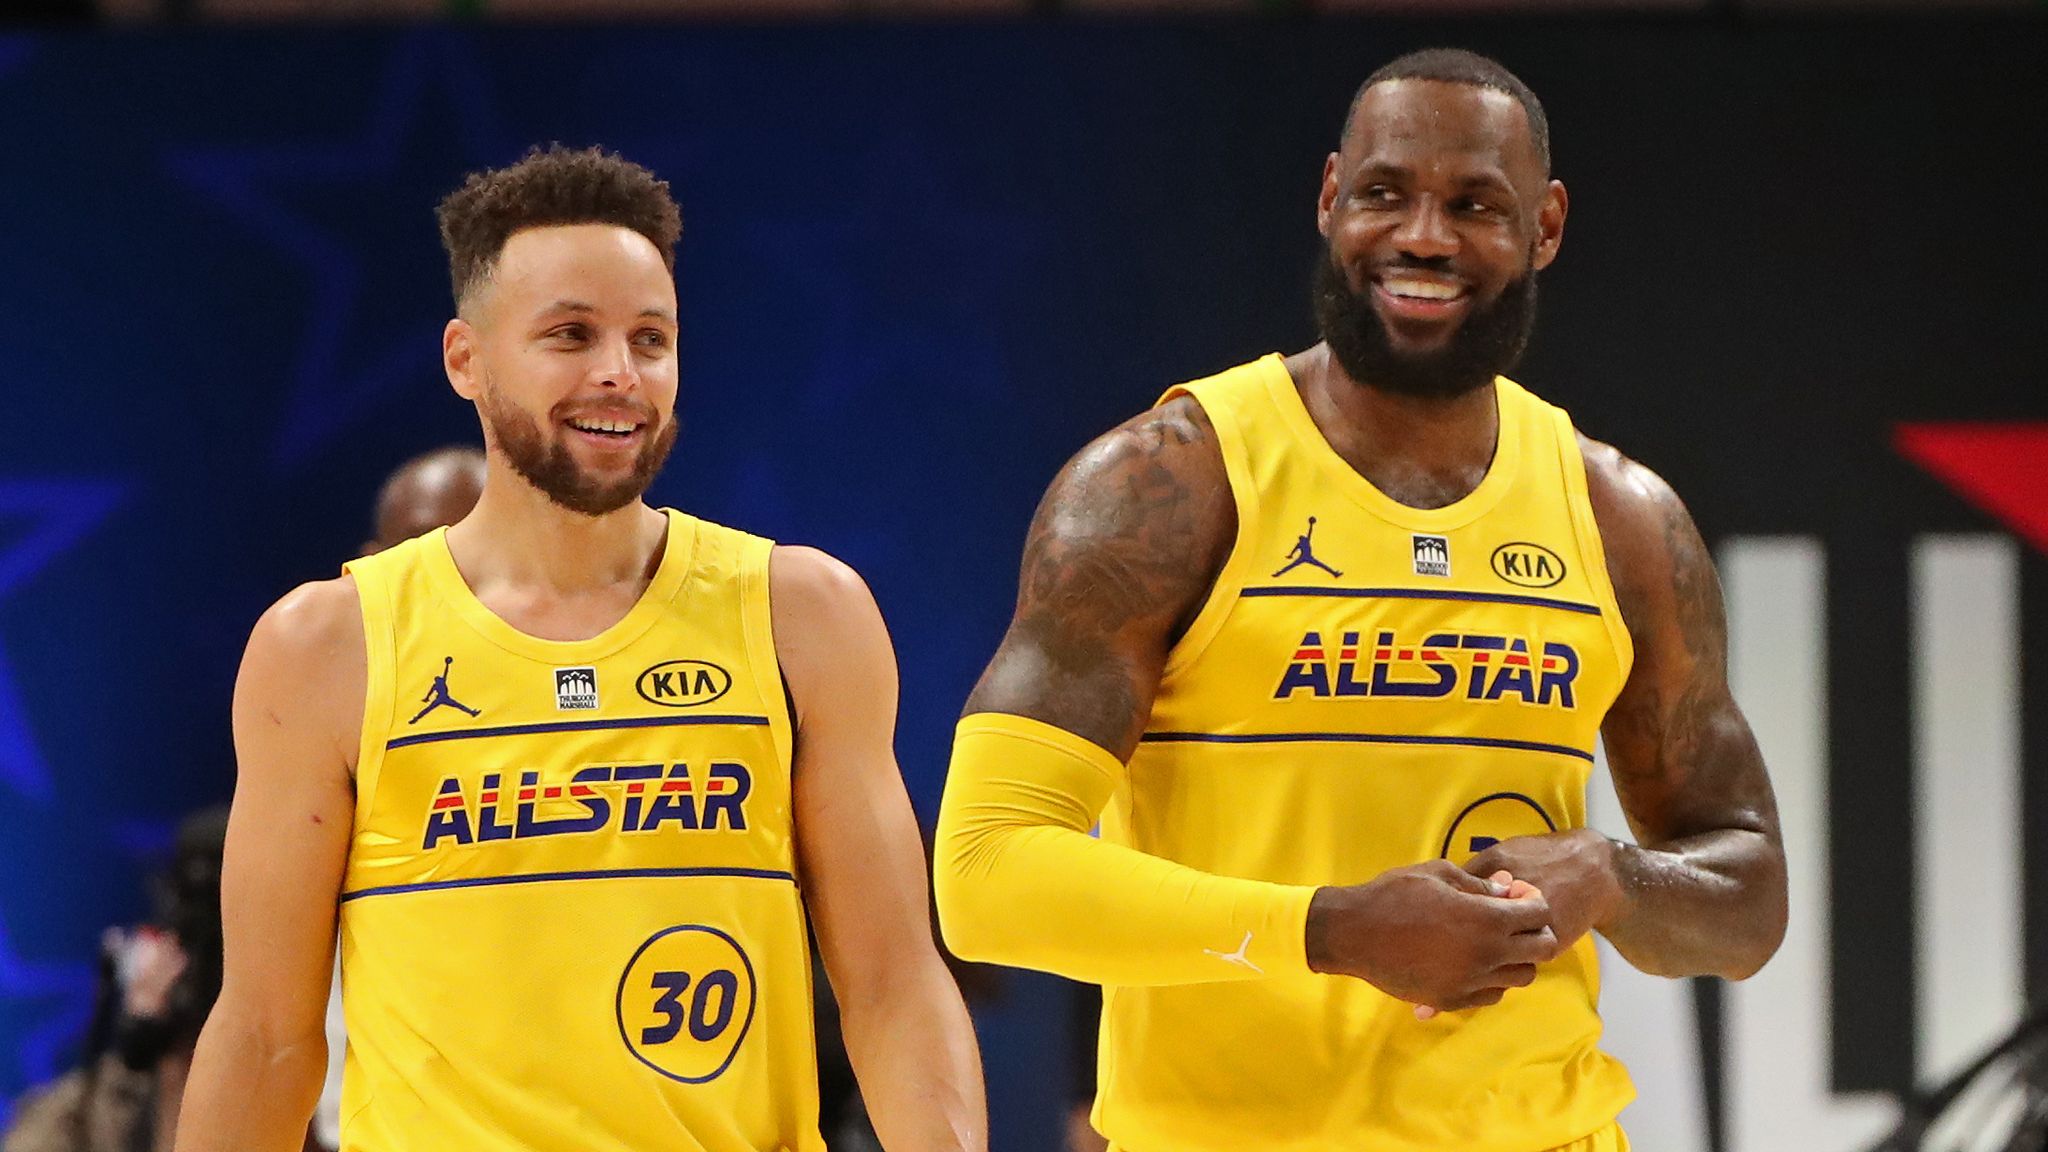 LeBron James, Stephen Curry Play on Same Team for First Time